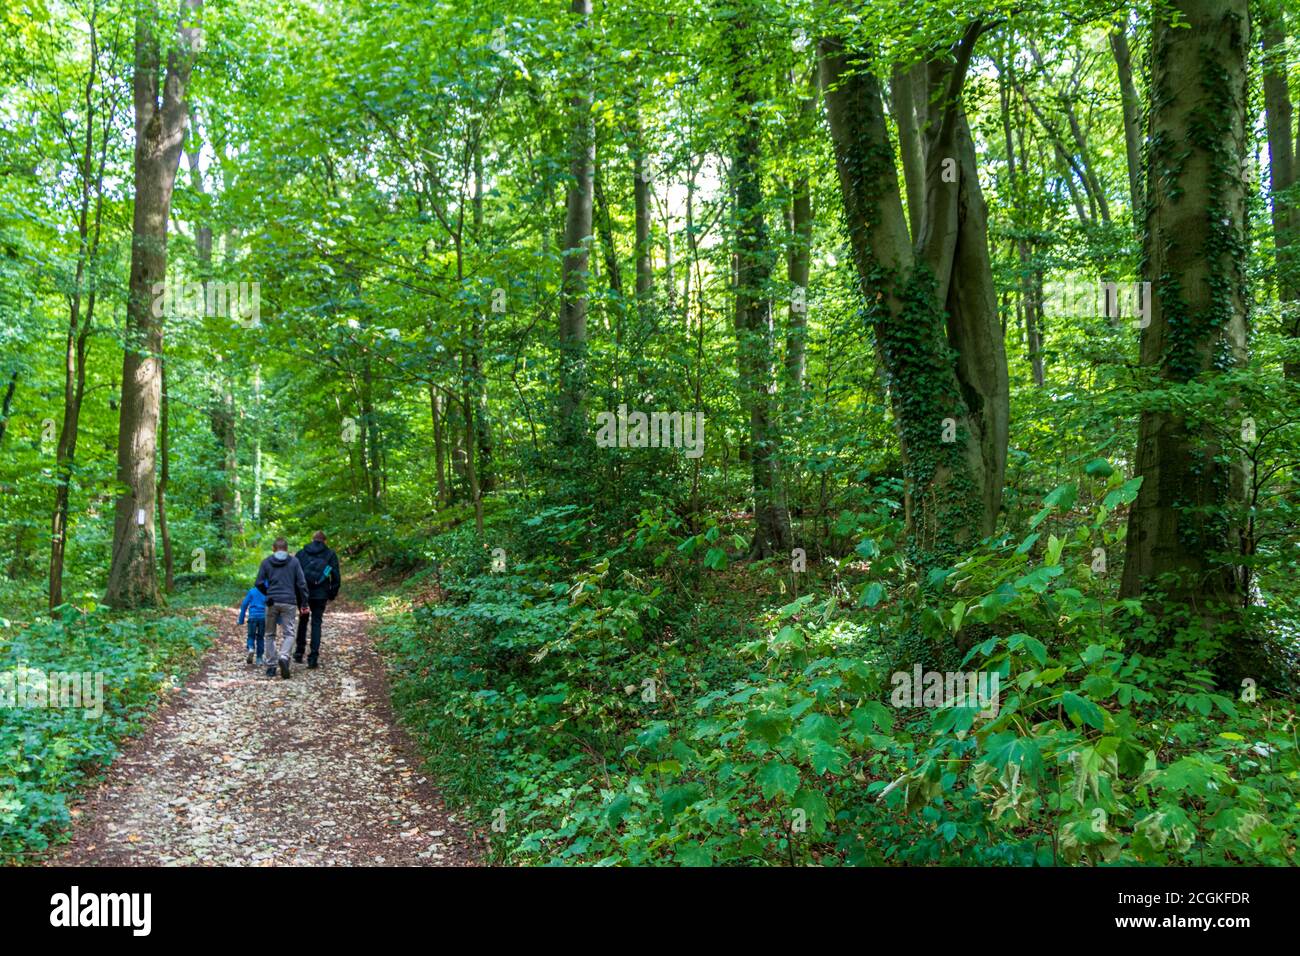 People go on a forest hike in Tecklenburger Land, Nordrhein-Westfalen, Germany. Stock Photo